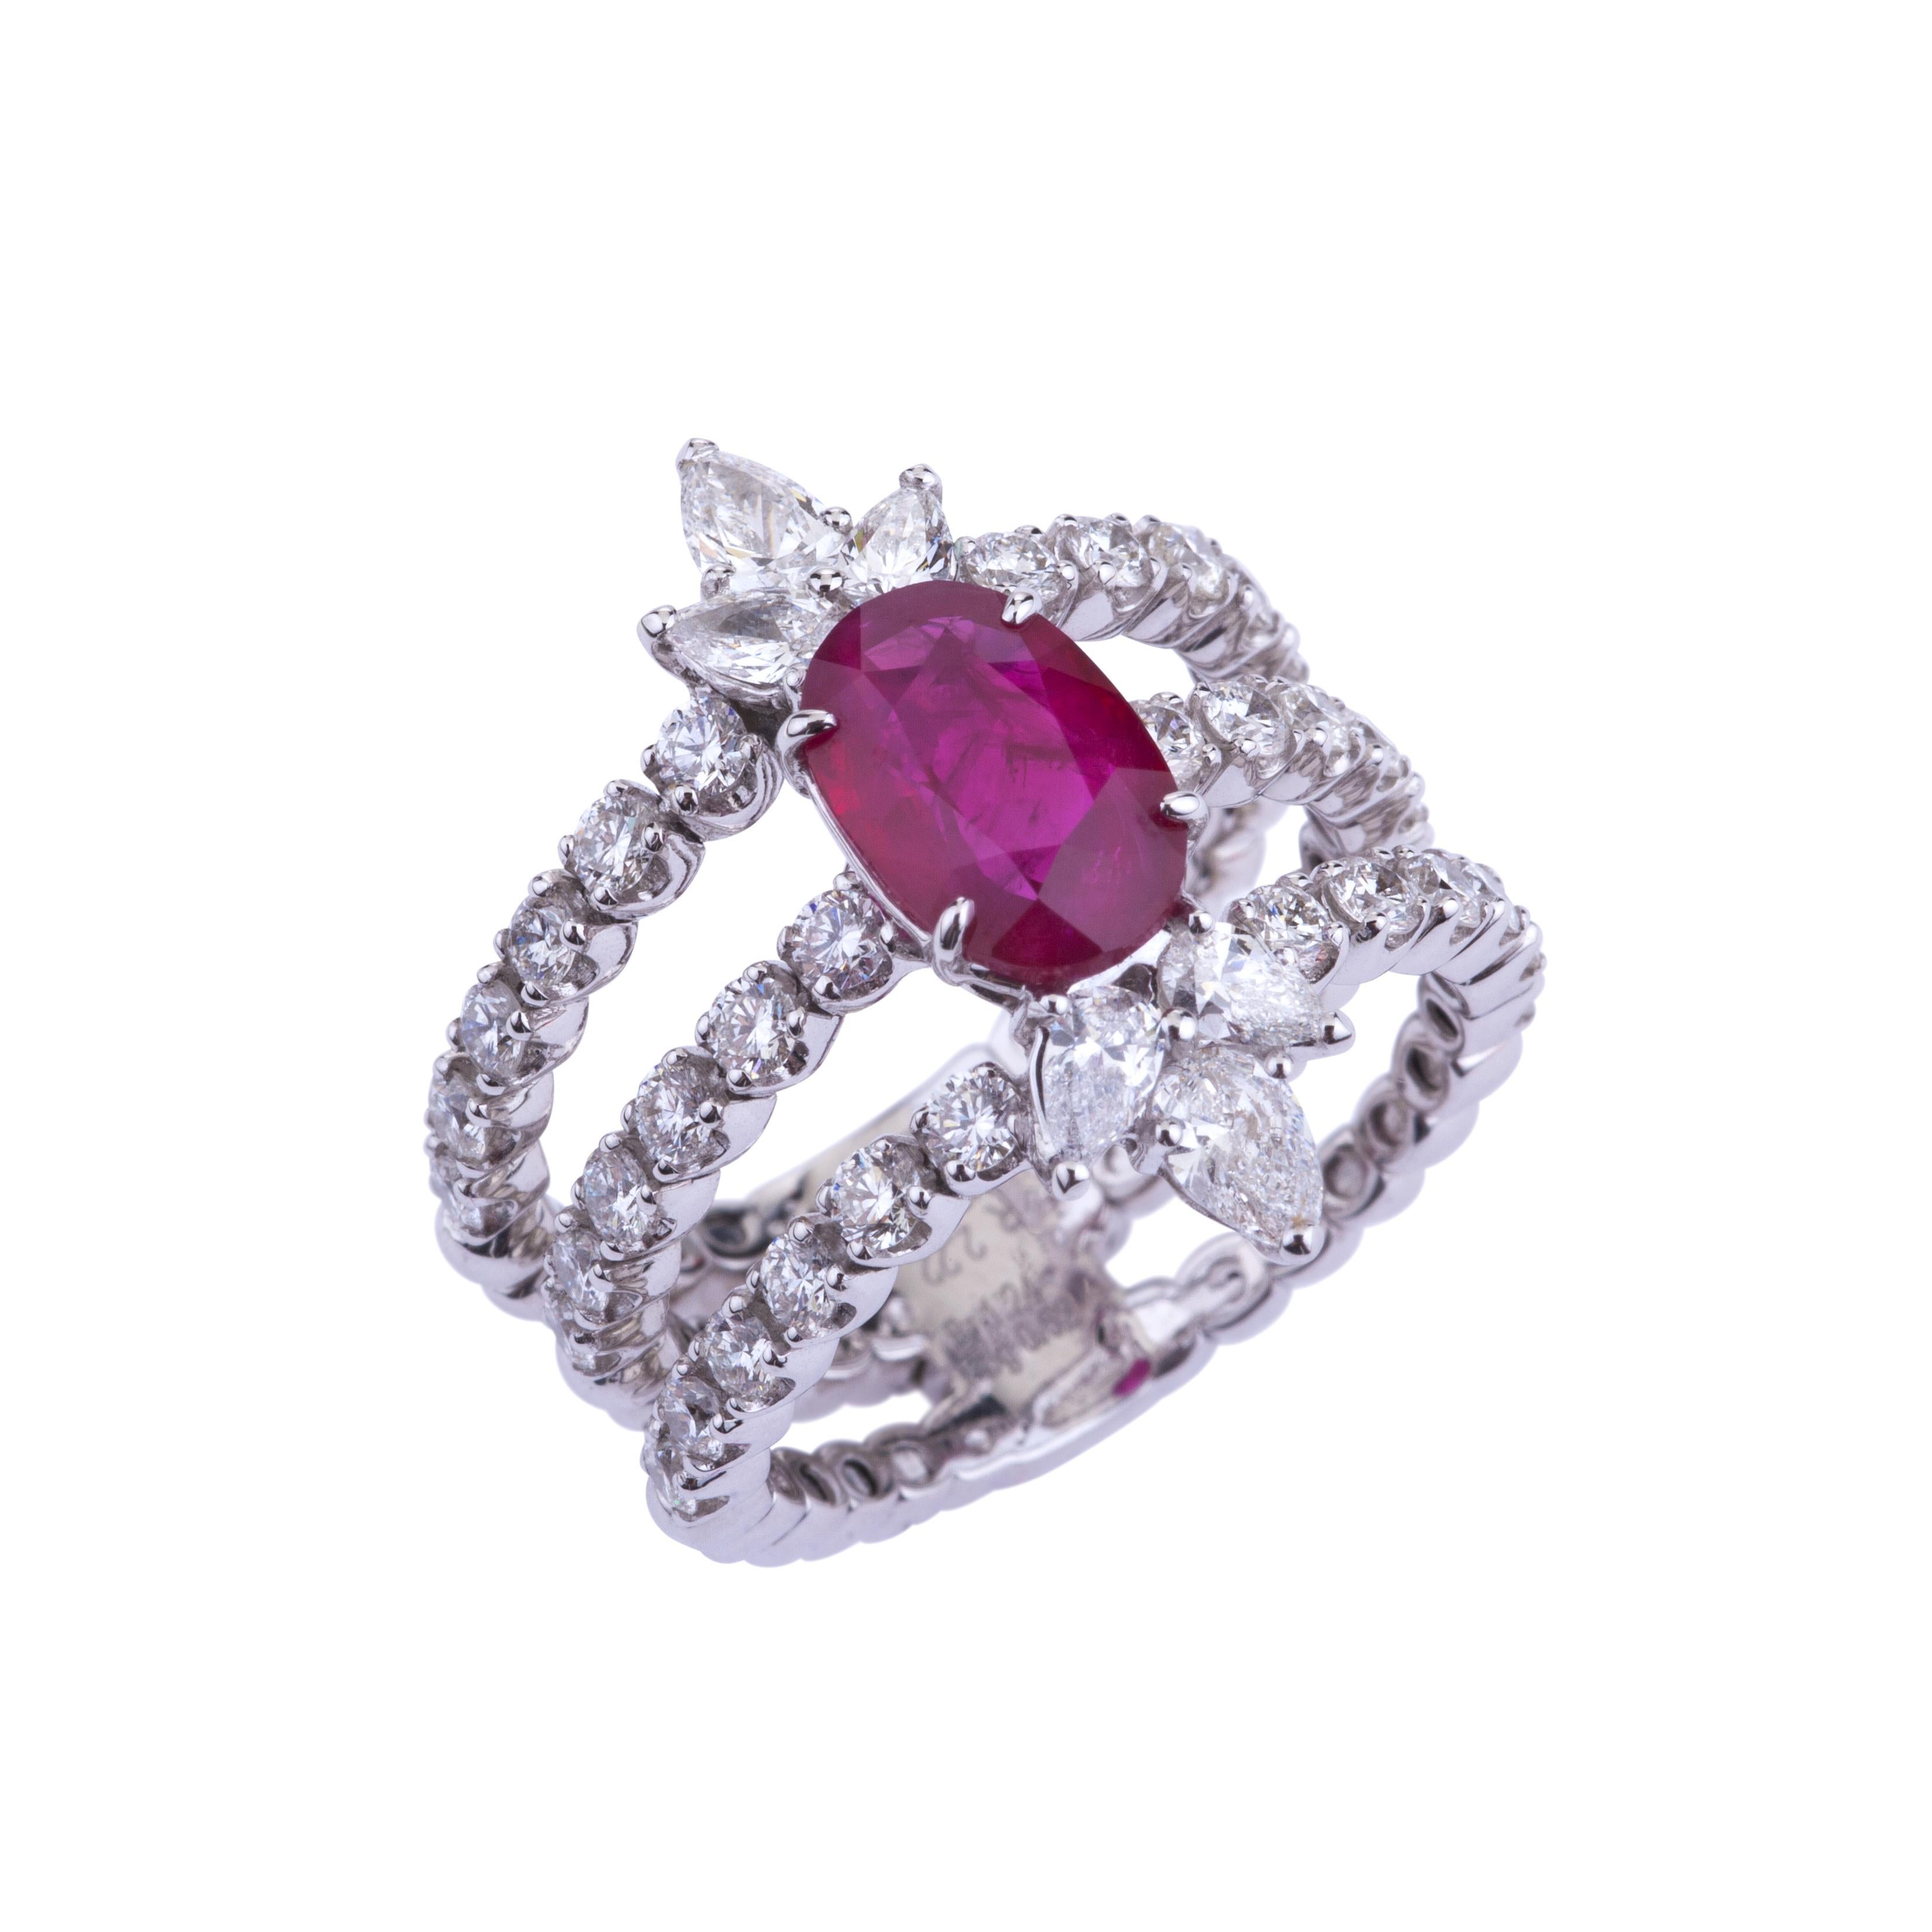 Contemporary Triple Ring with Diamonds and Burma Ruby with Certificate GRS.
Modern Design for this Ring with a Stunning Oval Ruby (ct. 2.22 Certificate GRS 9.50x6.36x3.82 faceted gemstone vivid red type 